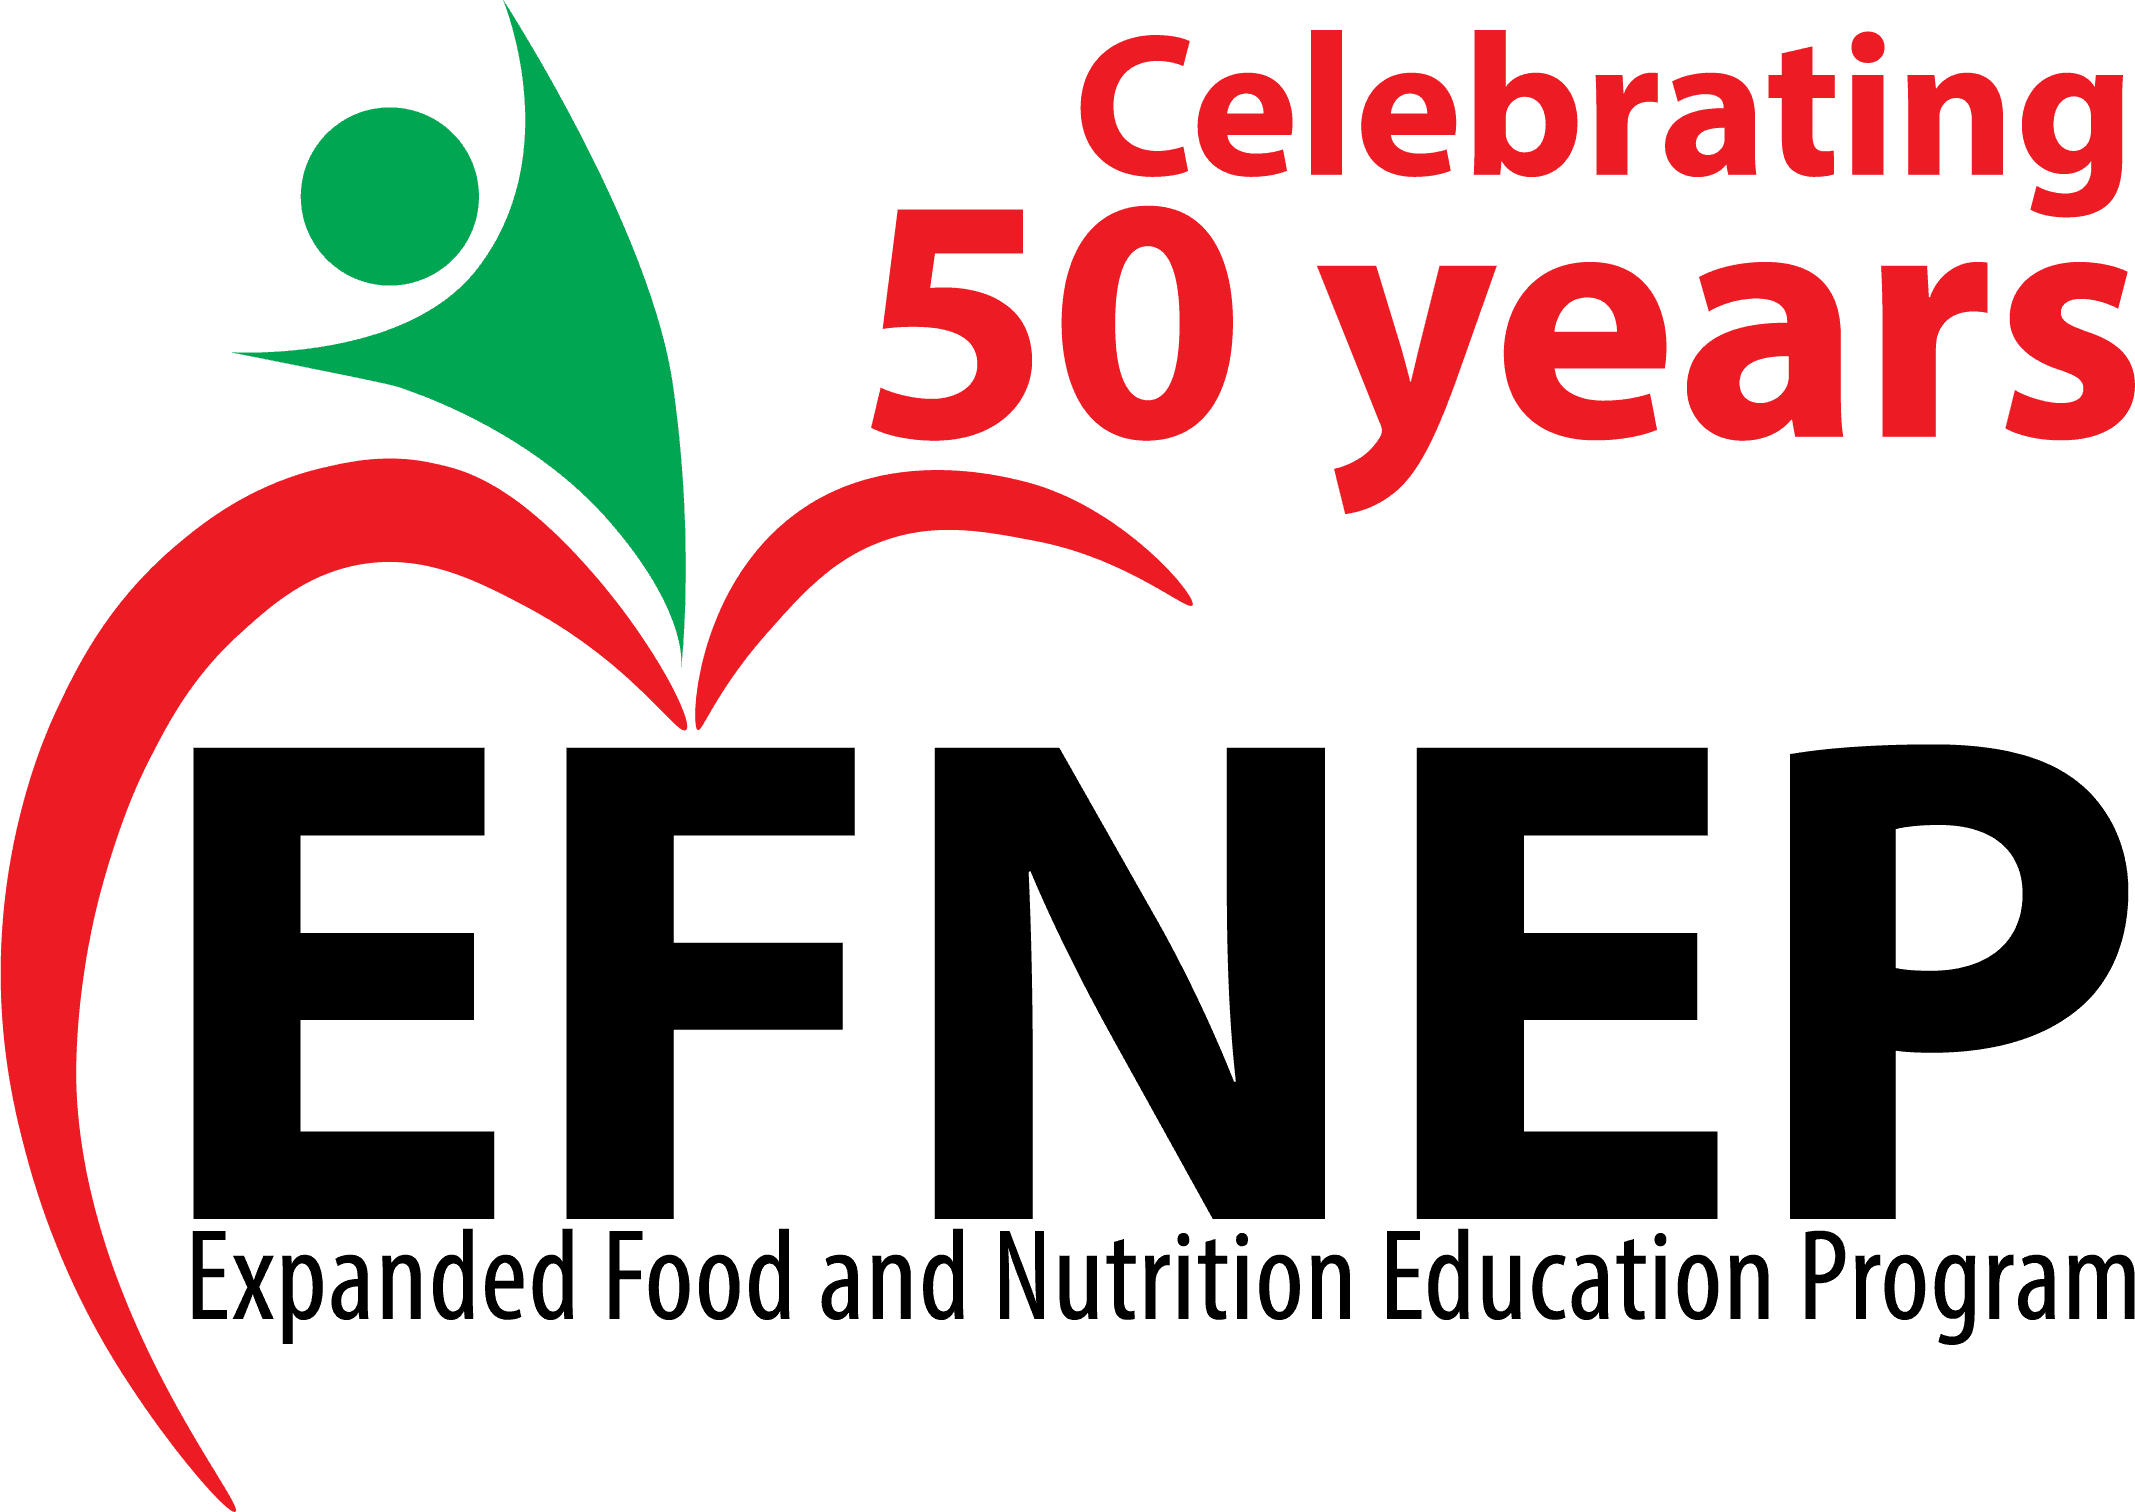 EFNEP (Expanded Food and Nutrition Education Program)